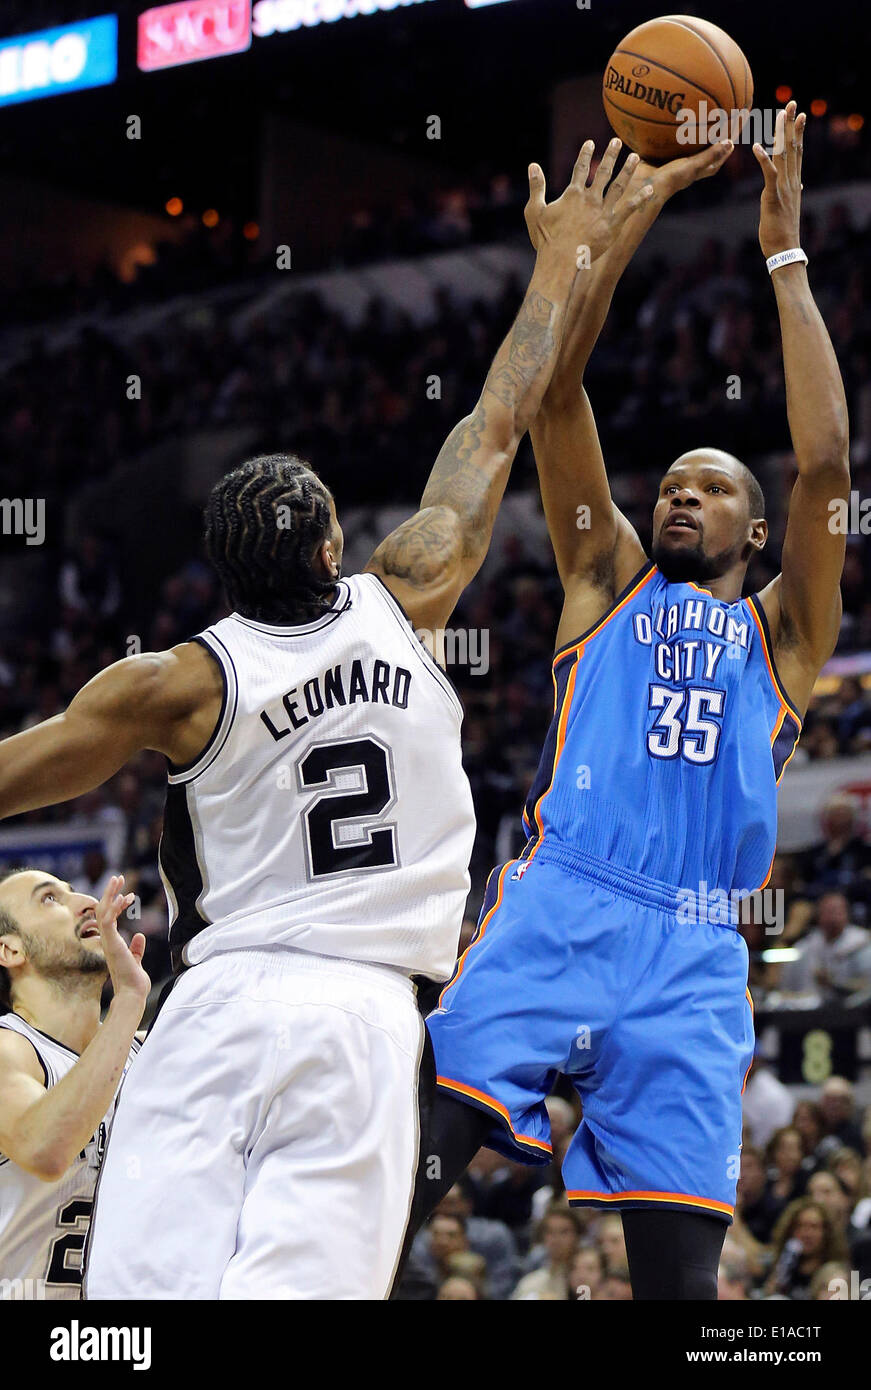 May 21, 2014 - San Antonio, TEXAS, USA - Oklahoma City Thunder's Kevin Durant shoots over San Antonio Spurs' Manu Ginobili and Kawhi Leonard during first half action of Game 2 in the Western Conference Finals Wednesday May 21, 2014 at the AT&T Center. (Credit Image: © San Antonio Express-News/ZUMAPRESS.com) Stock Photo